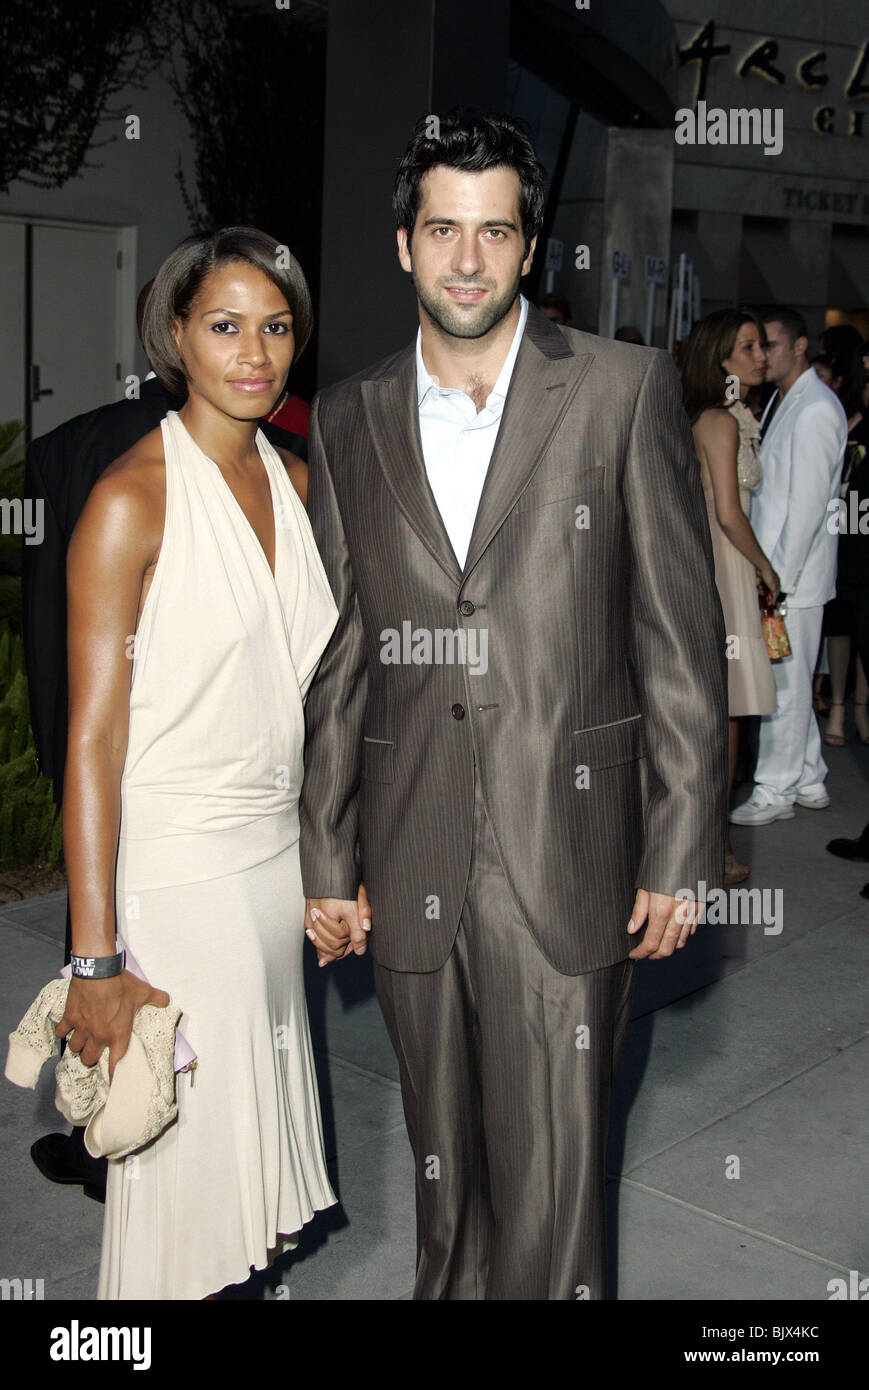 TROY GARITY HUSTLE & FLOW FILM PREMIERE CINERAMA DOME HOLLYWOOD LOS ANGELES USA 20 July 2005 Stock Photo